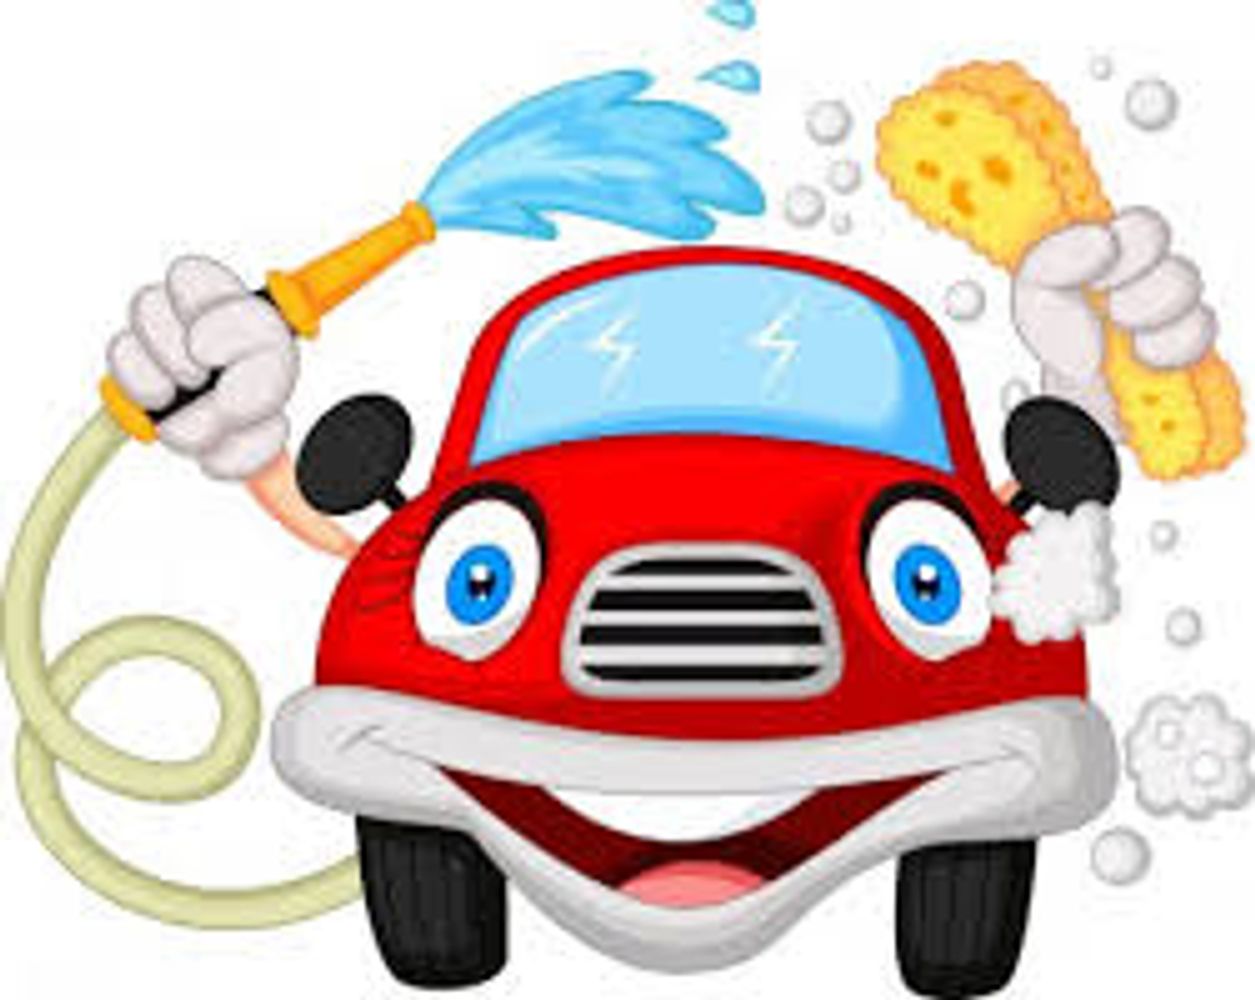 PROVIDING BEST EXPERIENCE OF WASHING YOUR CAR IN A CLEAN ENVIRONMENT
 
             Come get your va